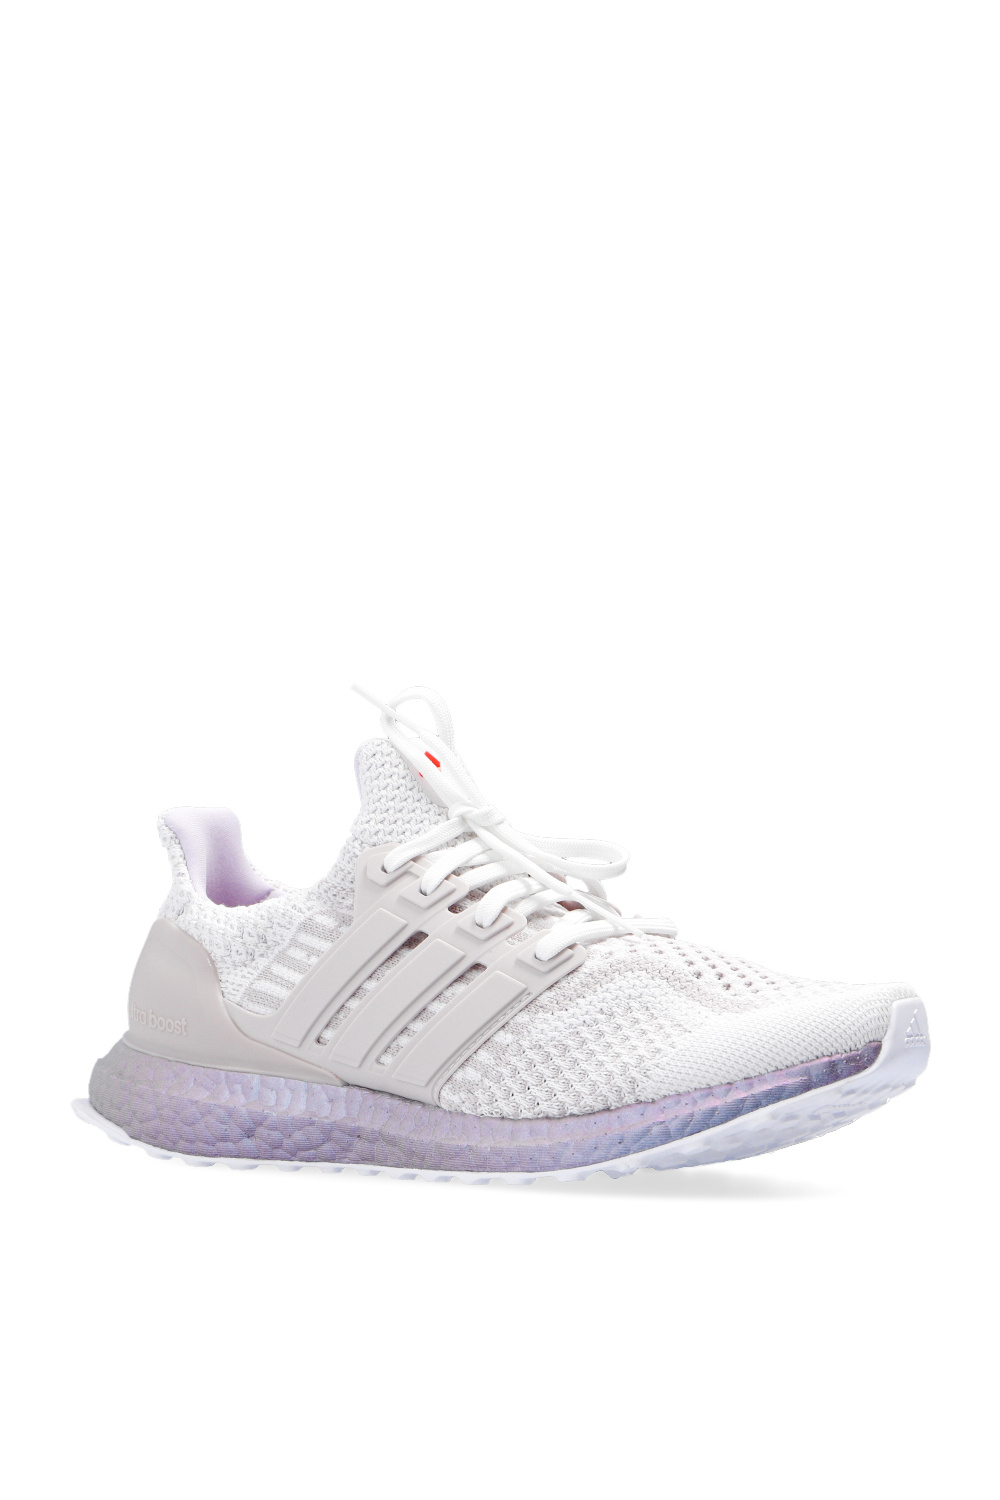 ADIDAS Performance 'UltraBOOST 5.0 DNA' sneakers | Women's Shoes 